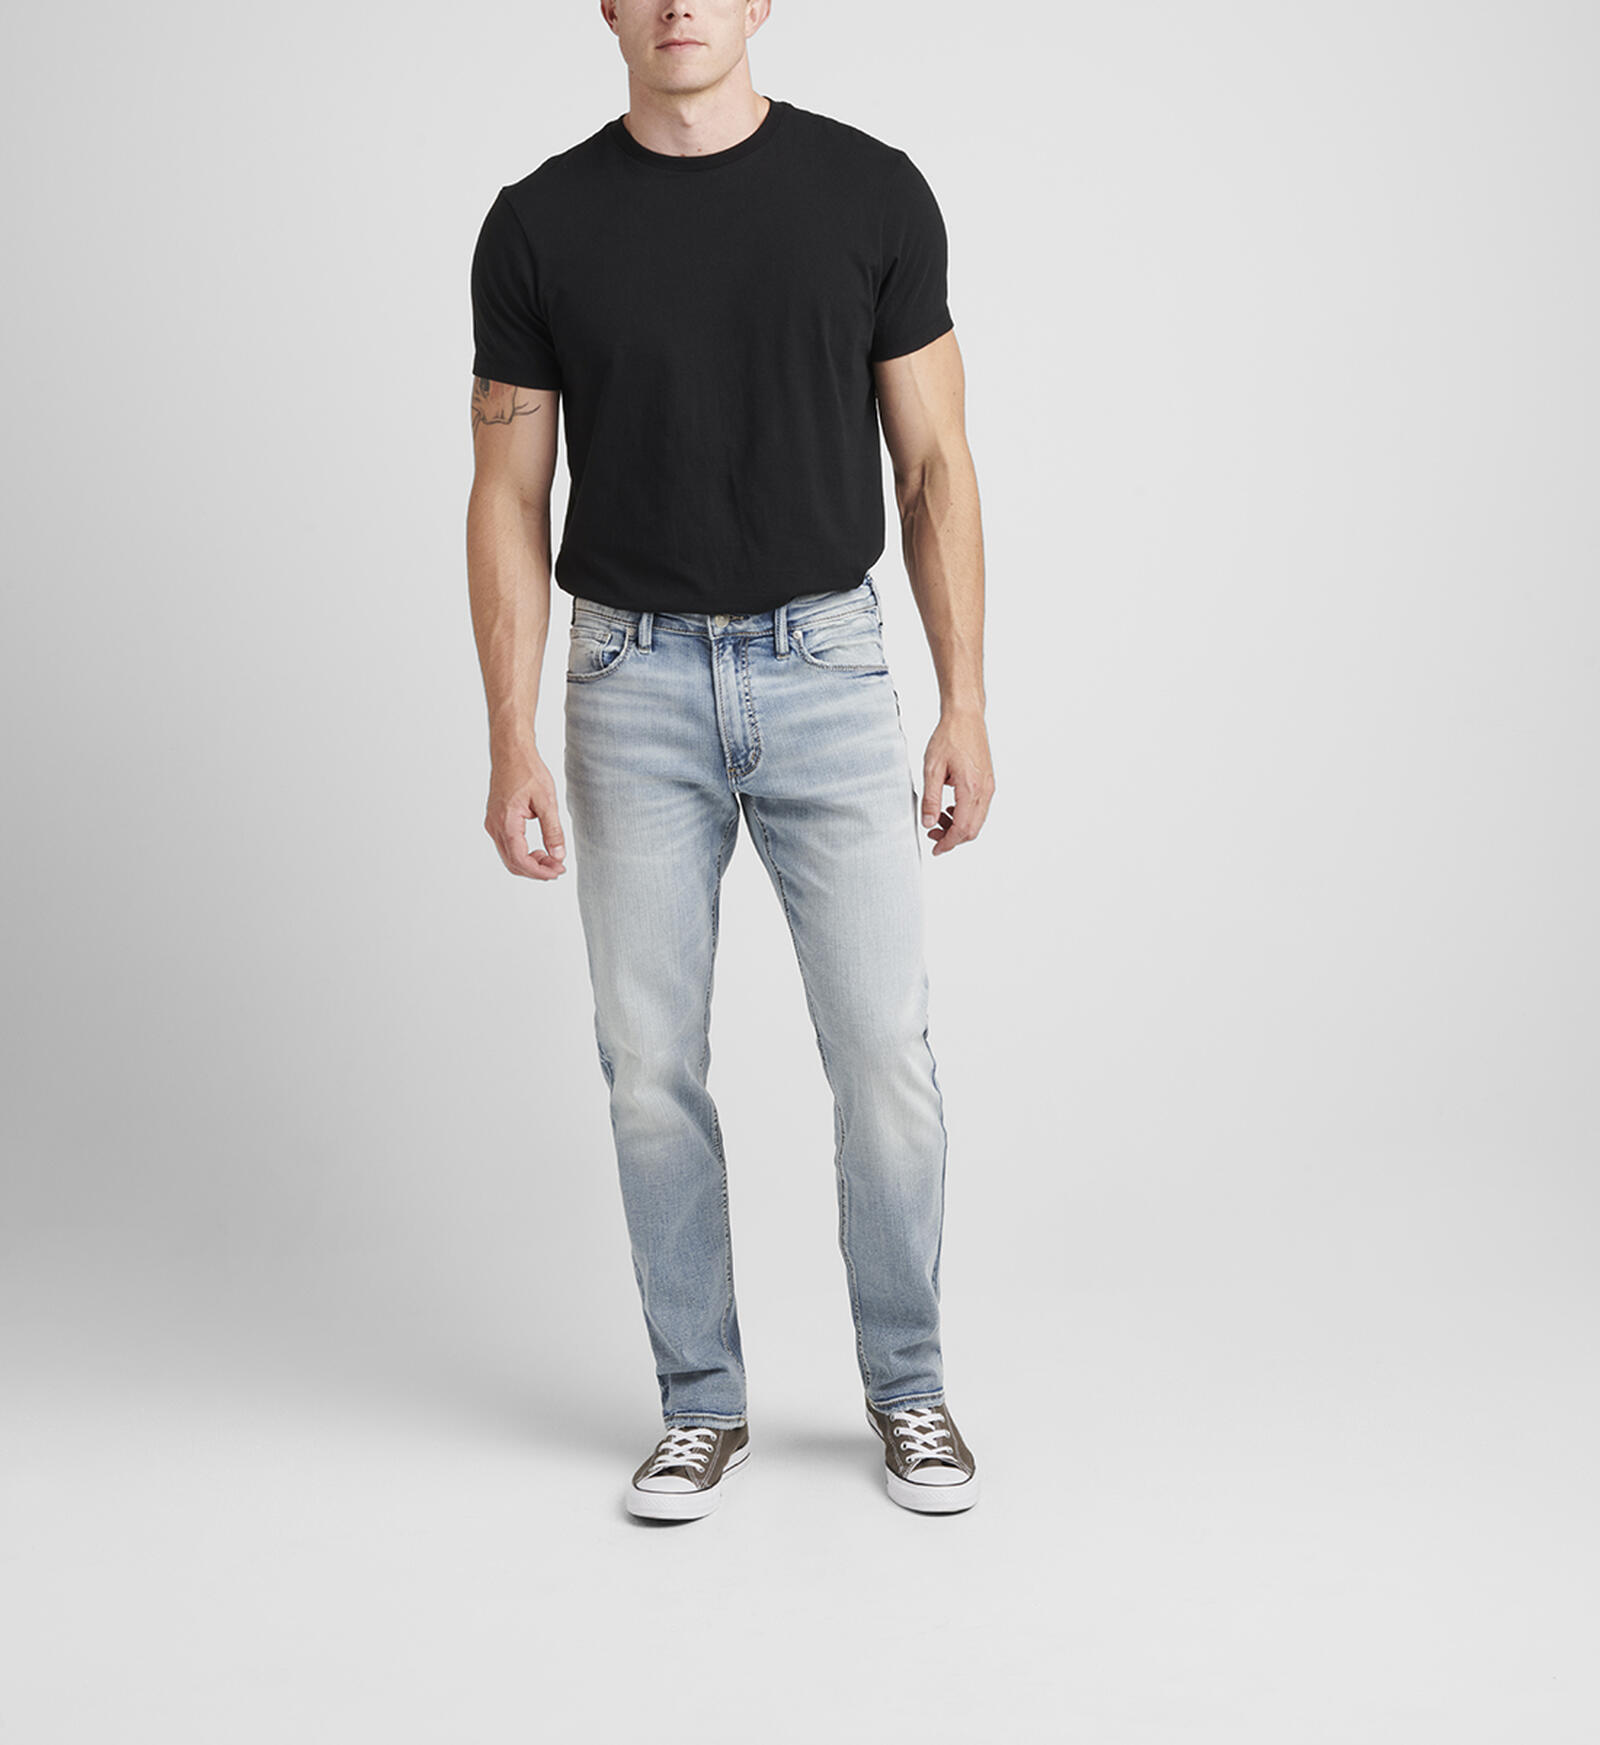 Men's Relaxed Fit Jeans - Tapered Leg